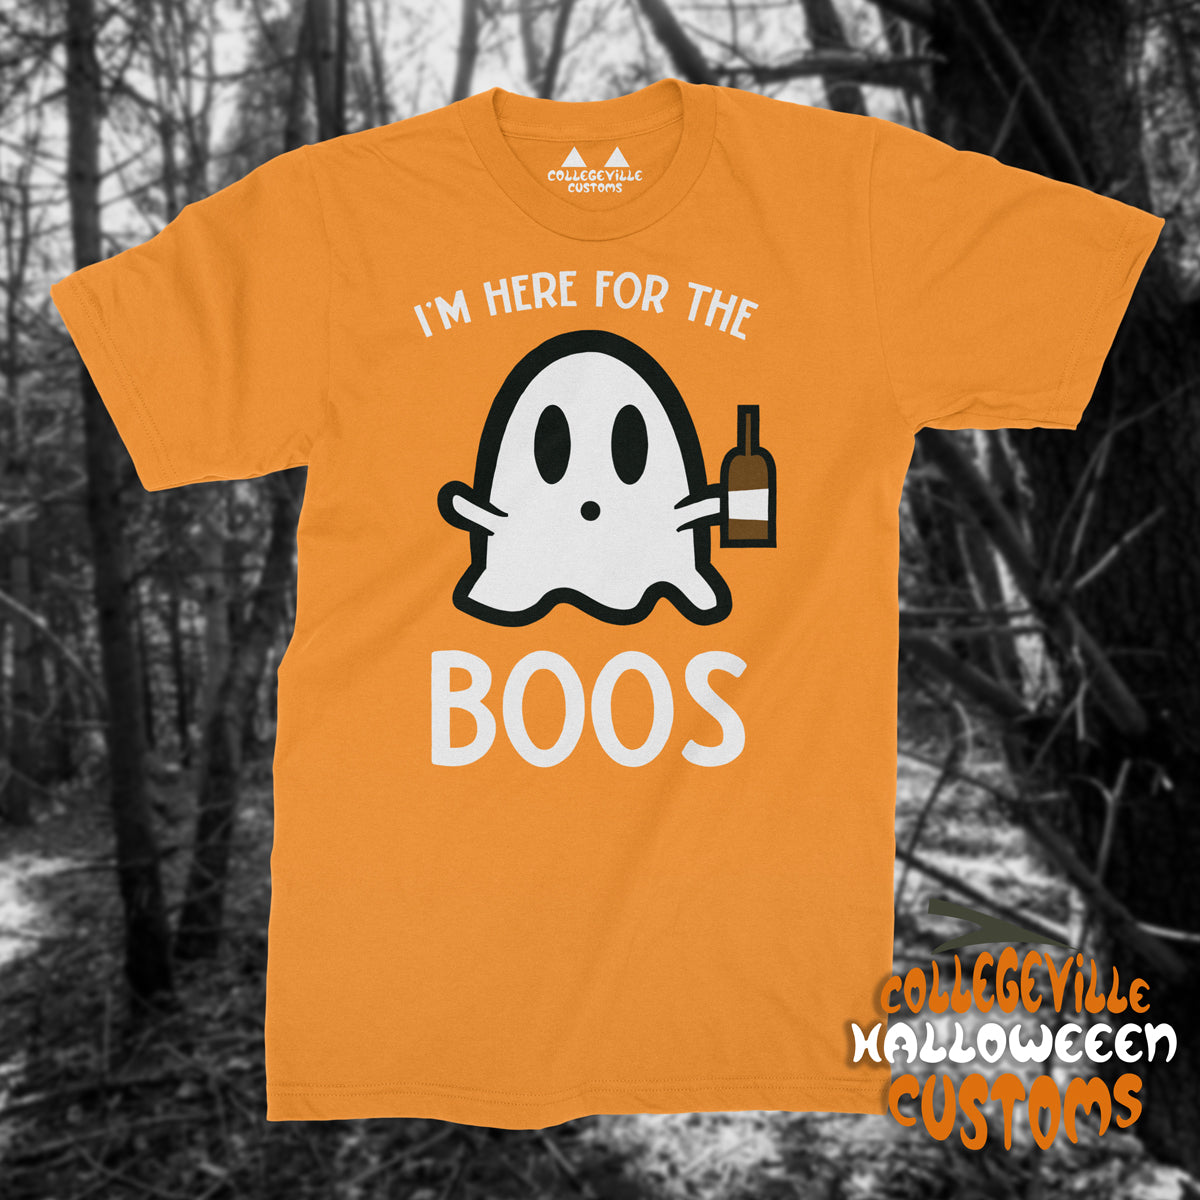 Funny "I'm Here for the BOOS Shirt" (Ghost Beer)